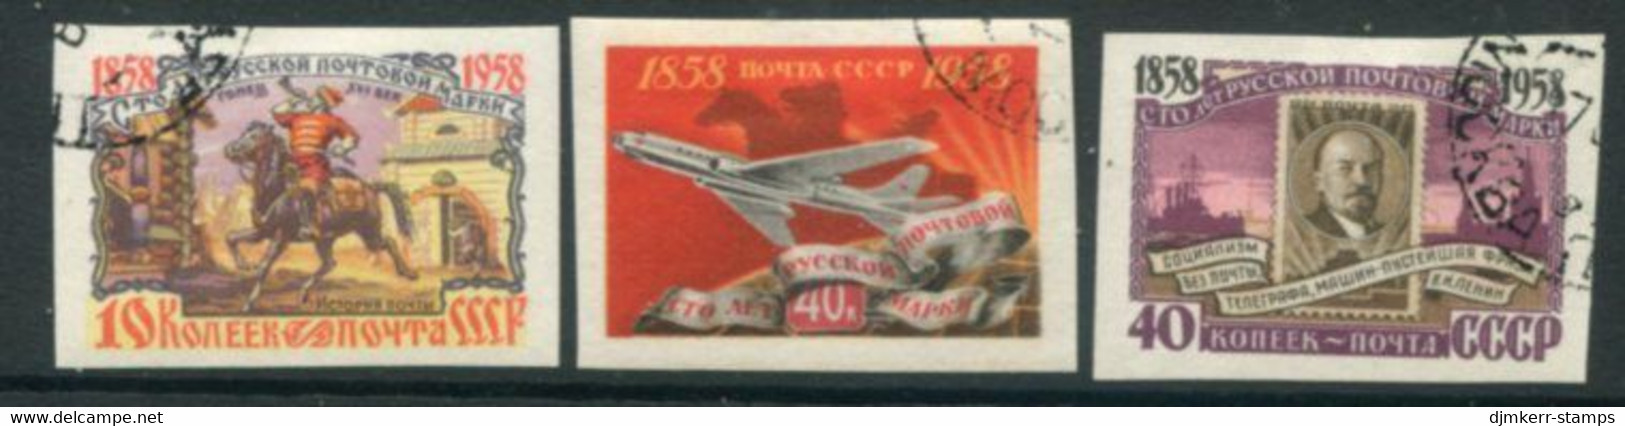 SOVIET UNION 1958 Russian Stamp Centenary Imperforate Used.  Michel 2114, 2118-19 B - Usados